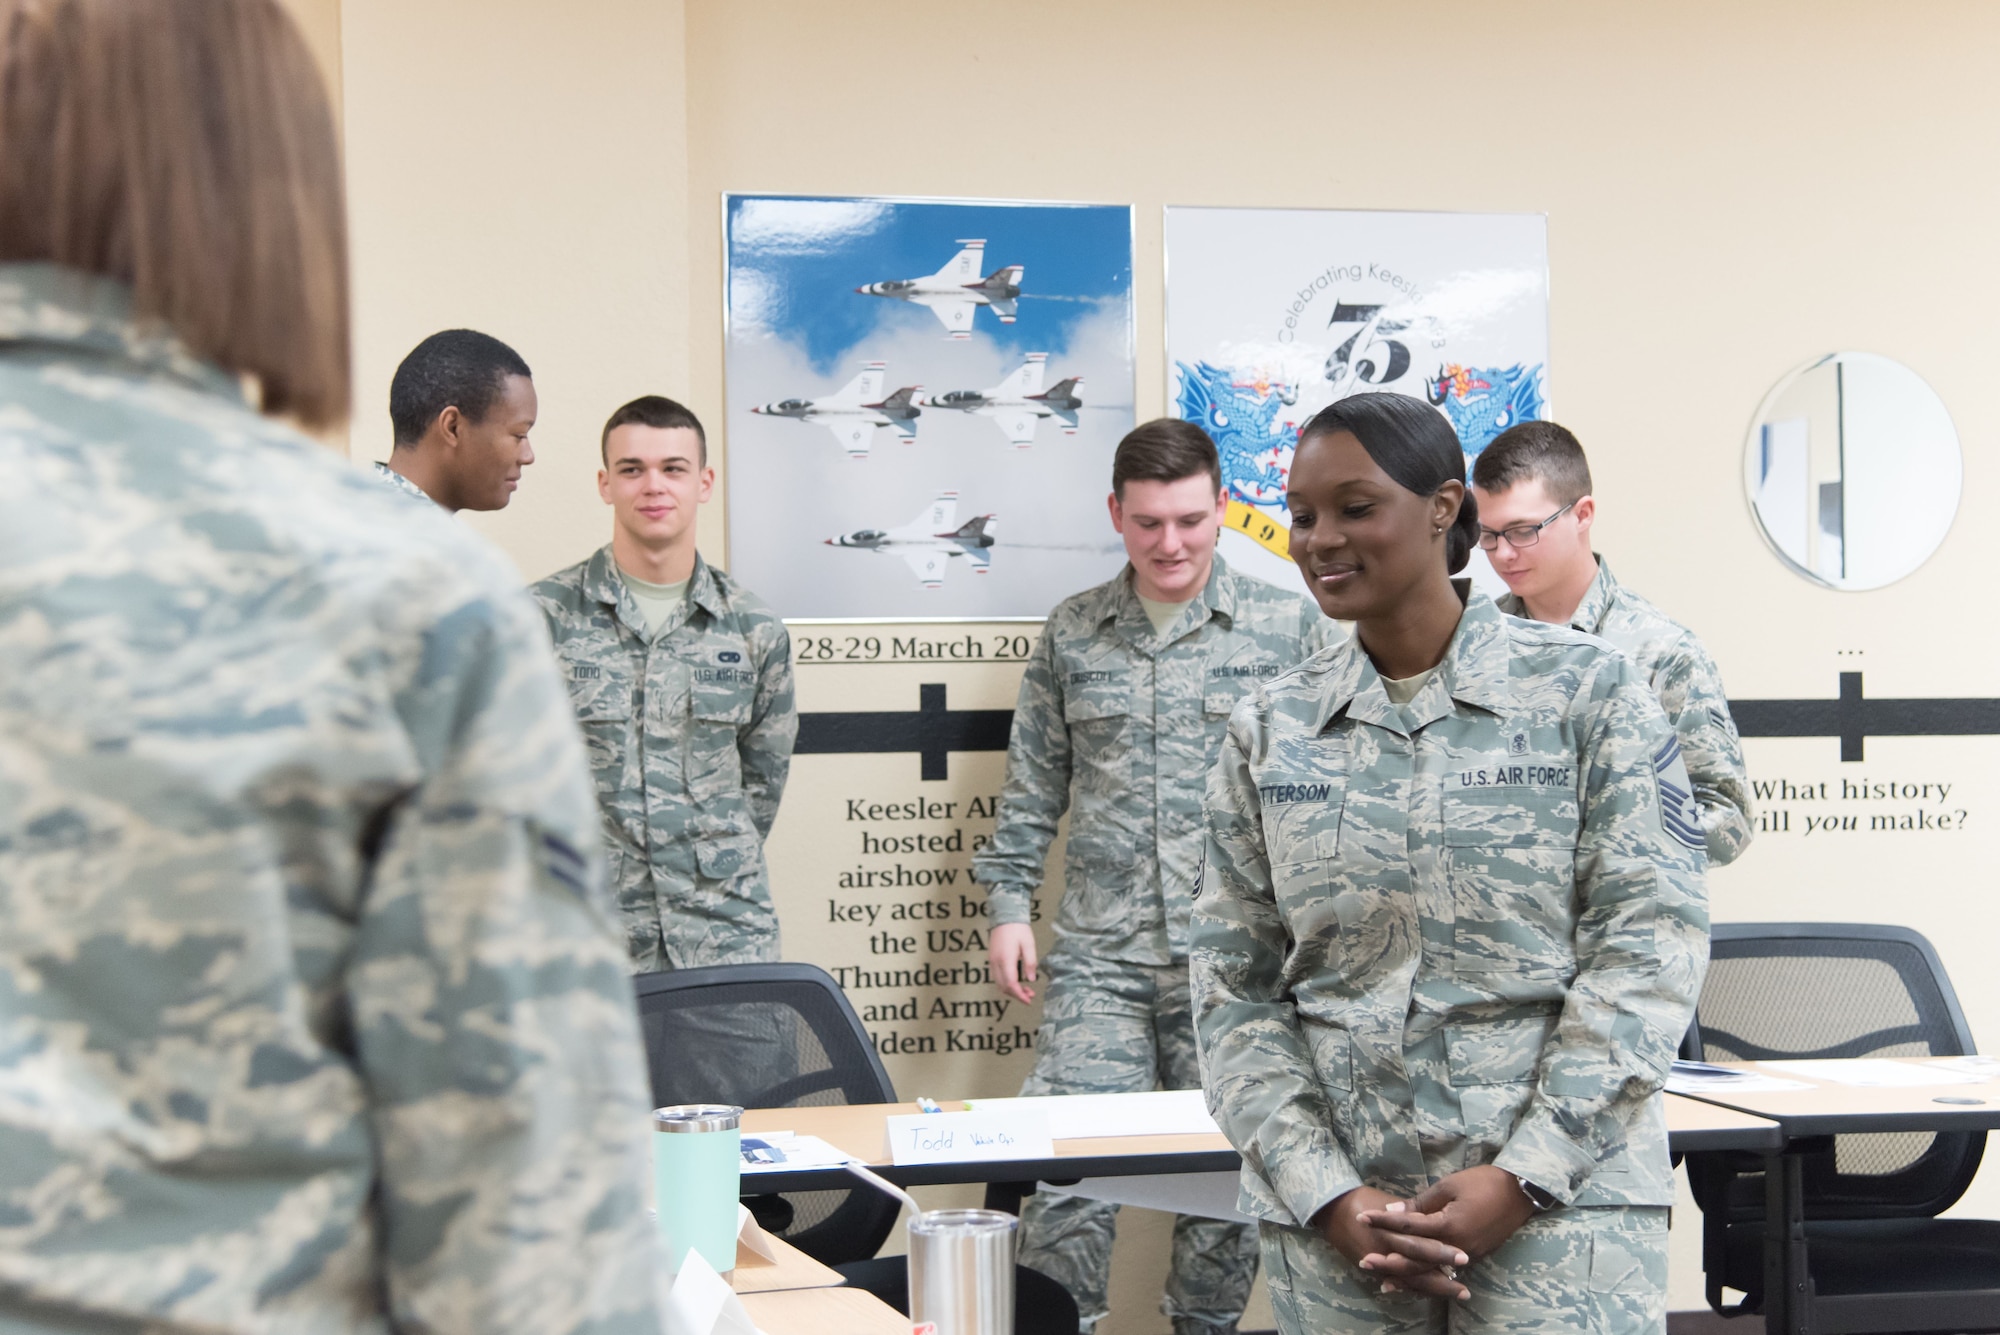 Senior Master Sgt. Tiffany Patterson, Keesler career assistance advisor, leads a group of Airmen in an activitiy called "find the common thread" during a First Term Airman's Course Dec. 11, 2017 at Keesler Air Force Base, Mississippi. (U.S. Air Force photo by Staff Sgt. Heather Heiney)